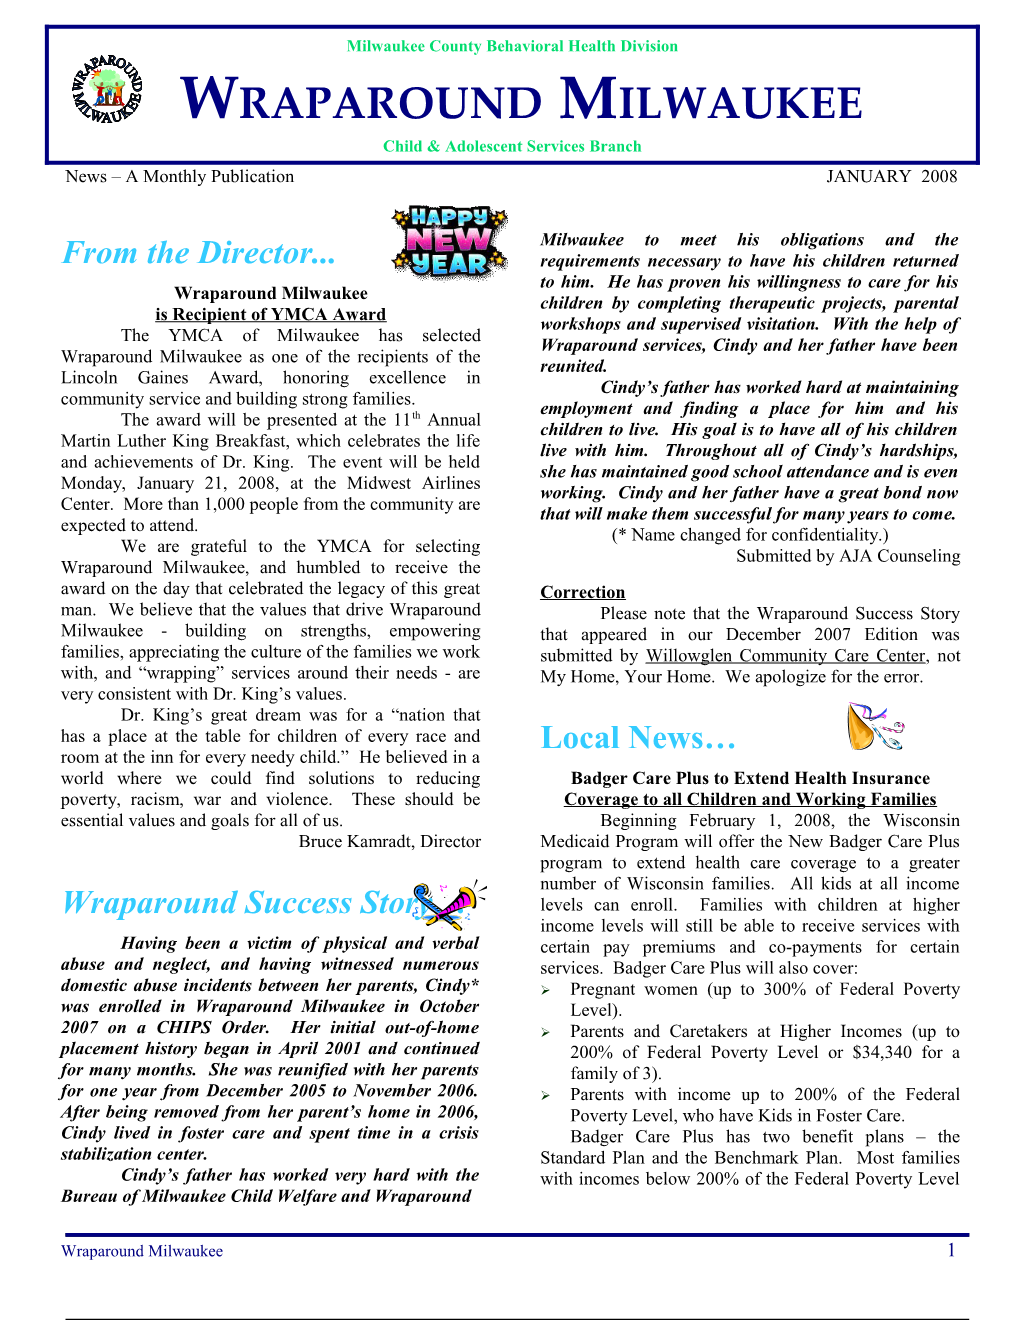 News a Monthly Publication JANUARY 2008